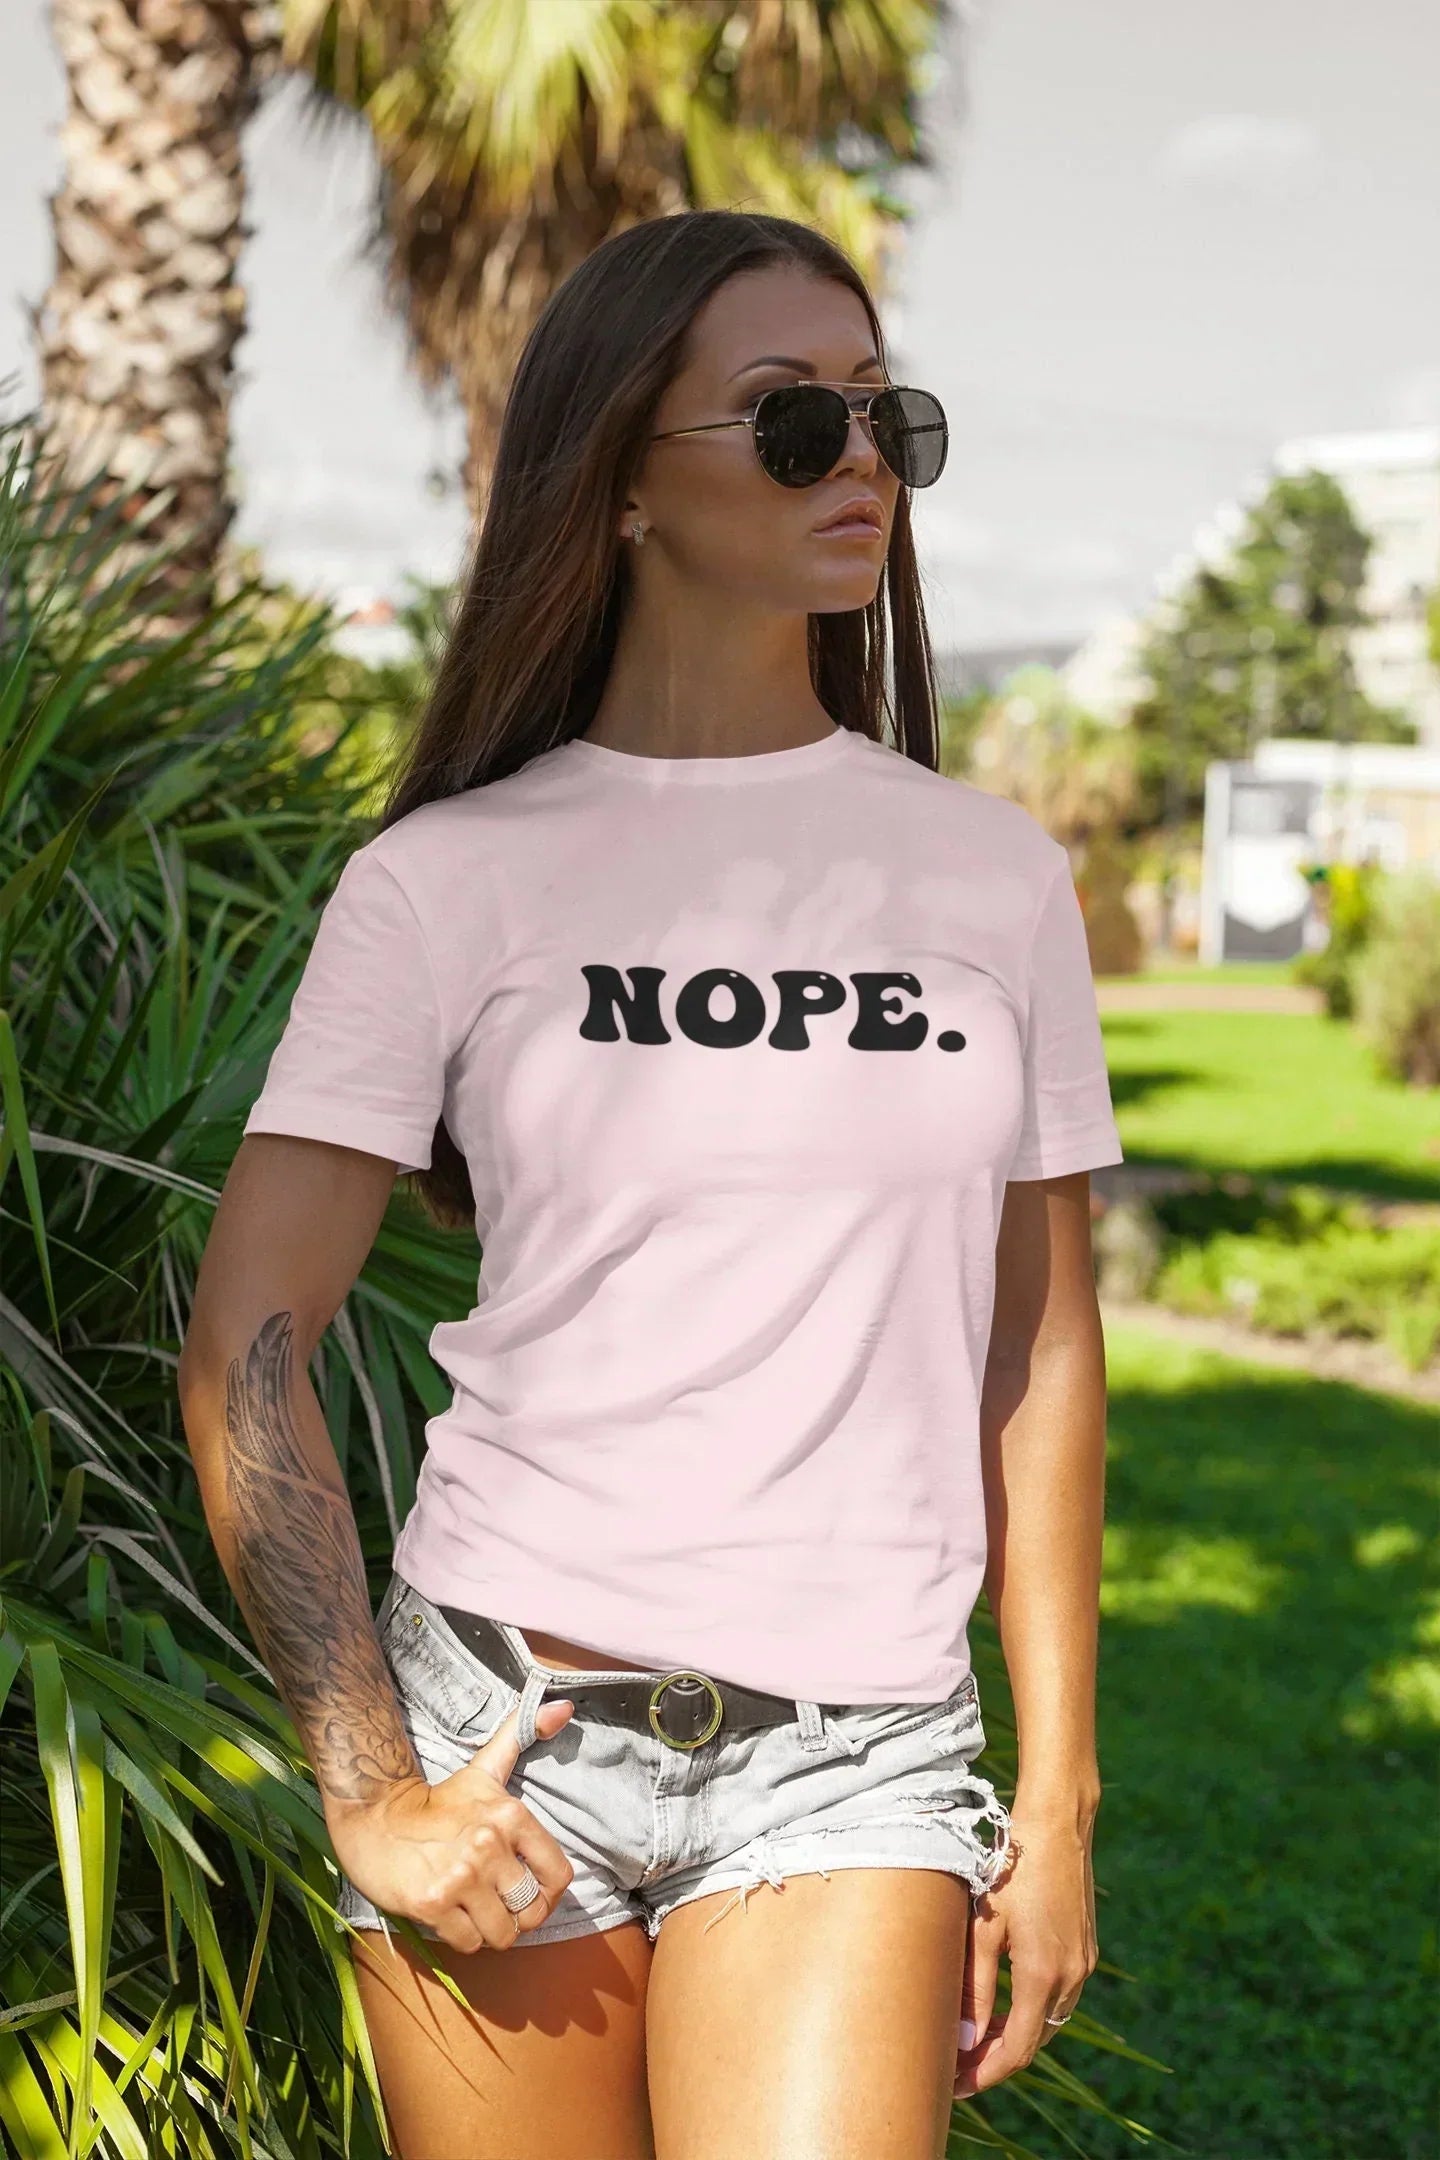 Nope Retro Shirt, Funny Sweatshirt, Cute Sassy Gift, Funny Graphic Longsleeve Tee, Funny Hoodie, Gift For Her, Sarcastic Sweater